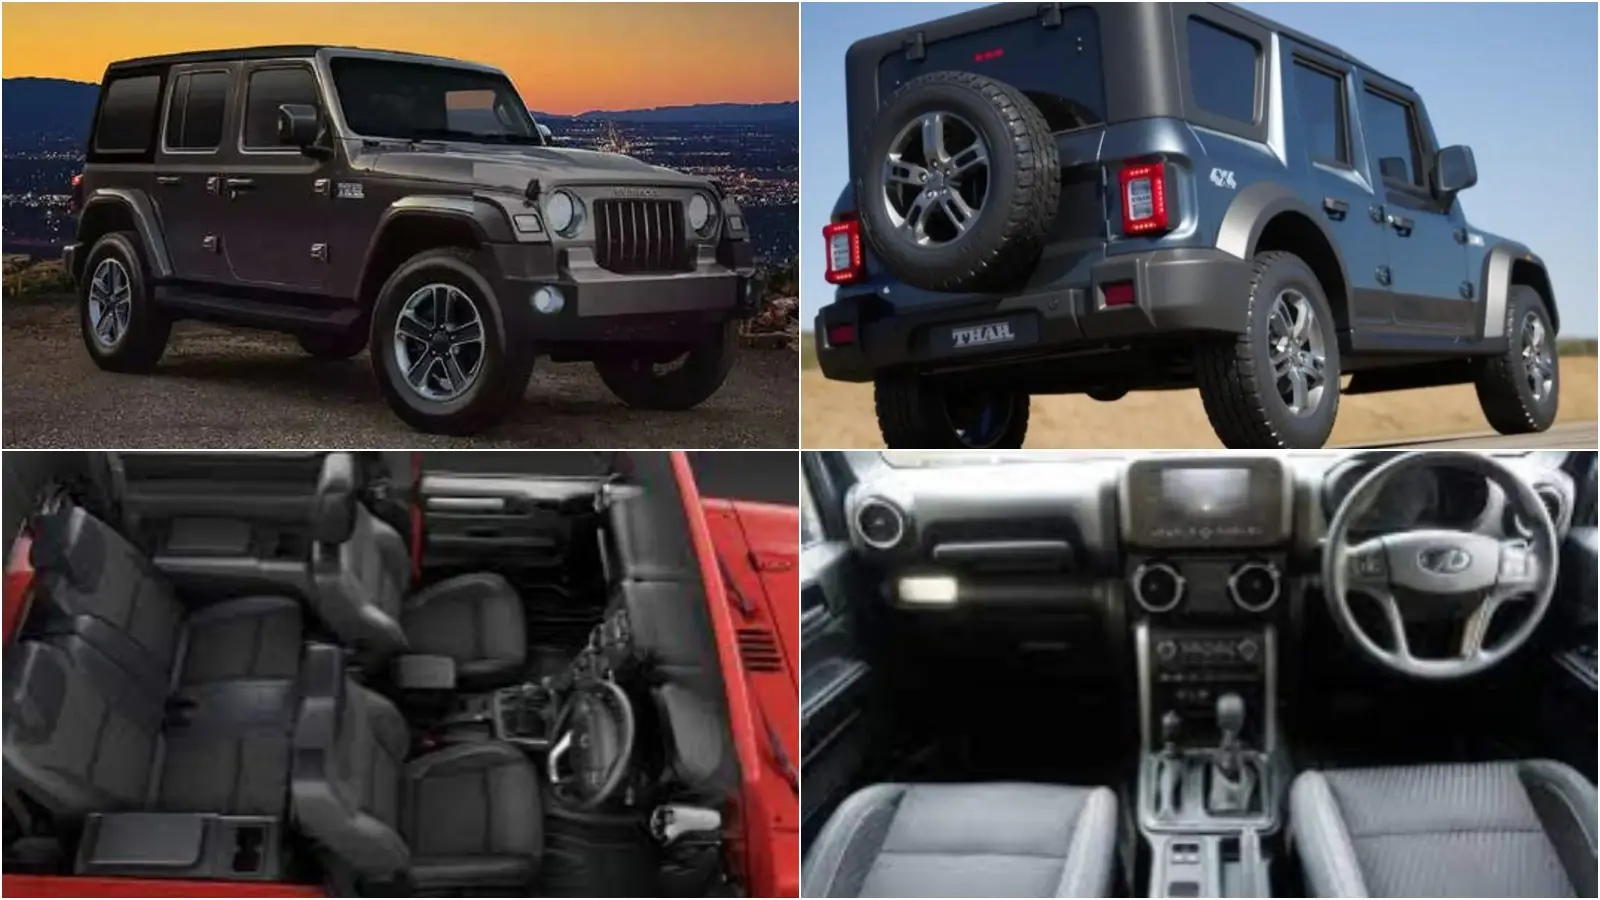 Mahindra Thar 5 door launch date, Expected Price, Mileage, Engine specification, Seating capacity and Top Speed